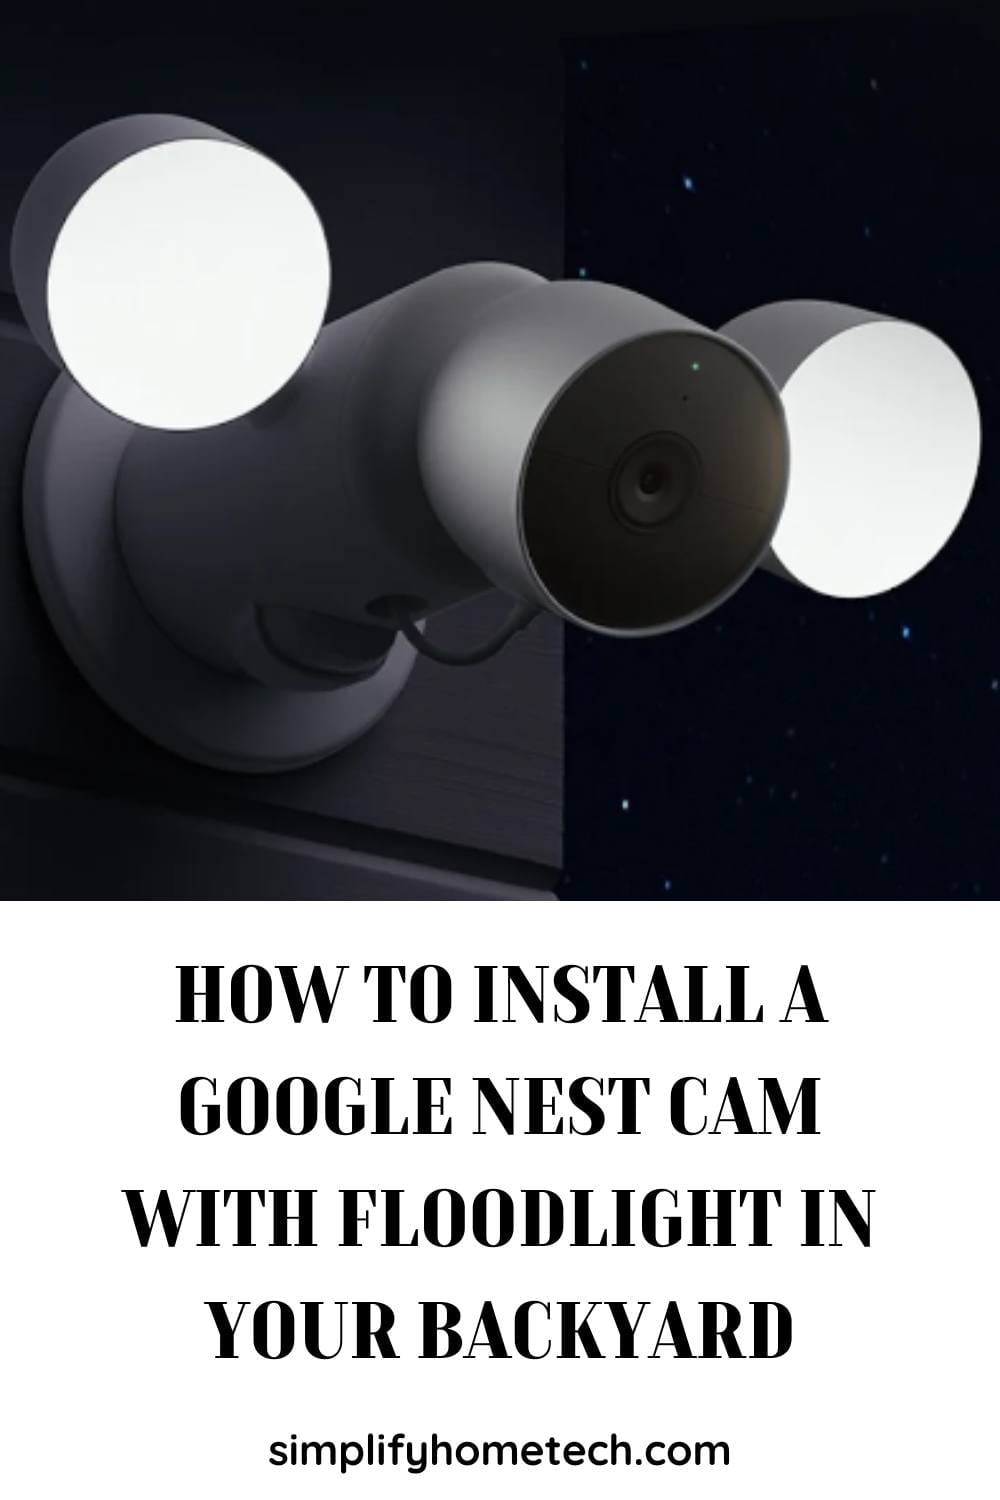 How to Install a Google Nest Cam with Floodlight in Your Backyard